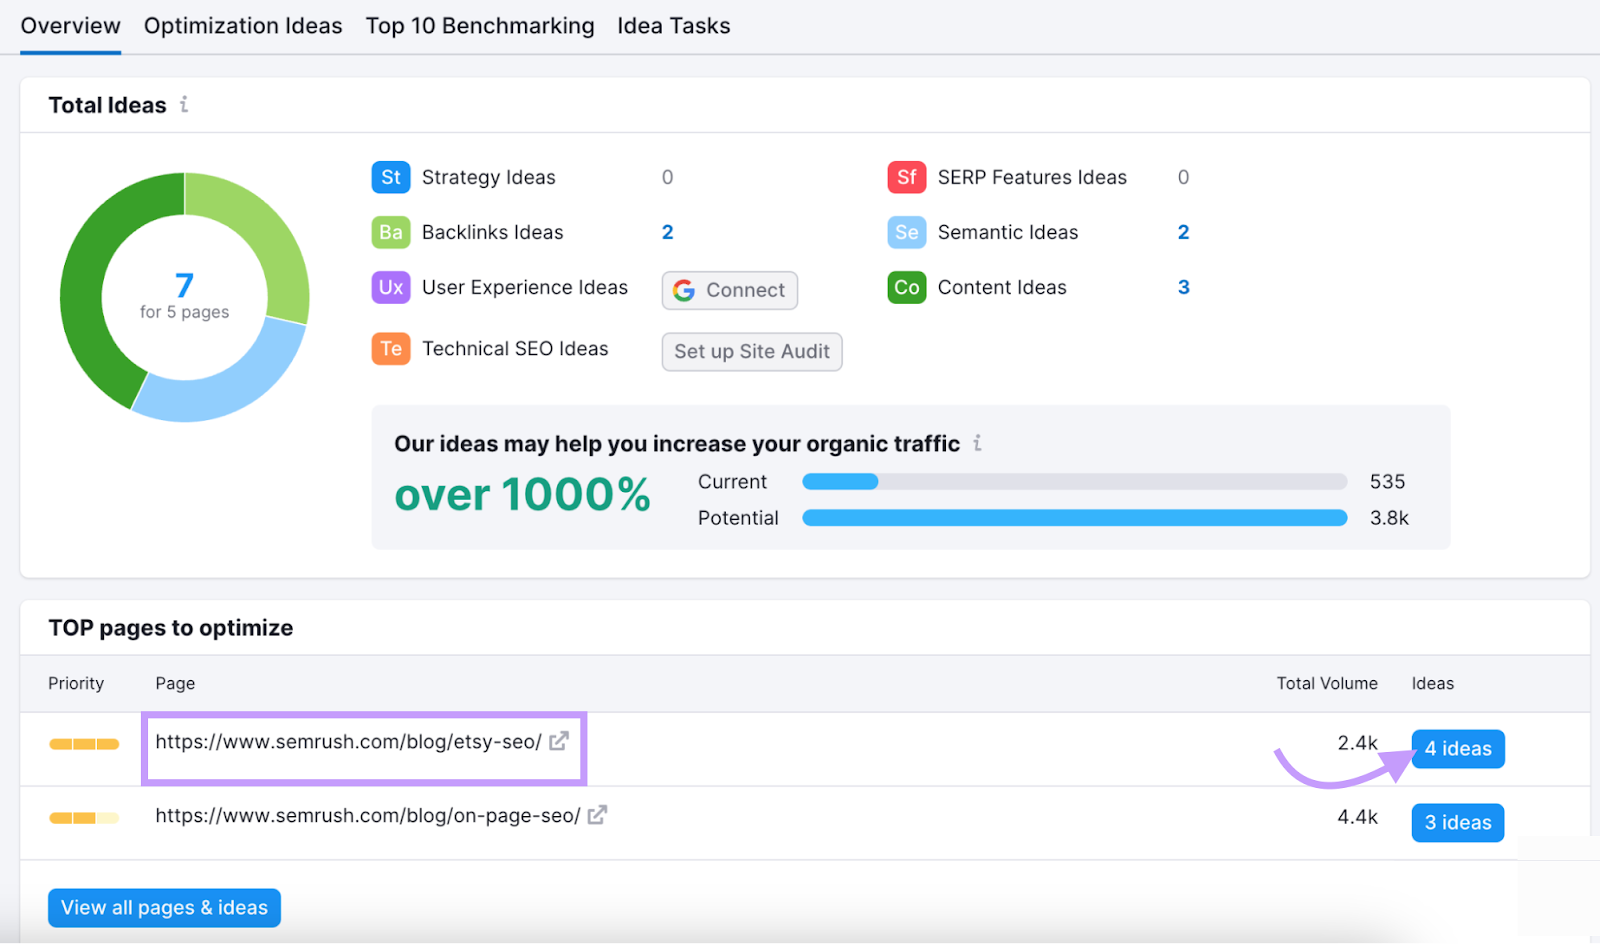 an overview dashboard in On Page SEO Checker shows strategy, backlinks, user experience, technical seo, and other ideas